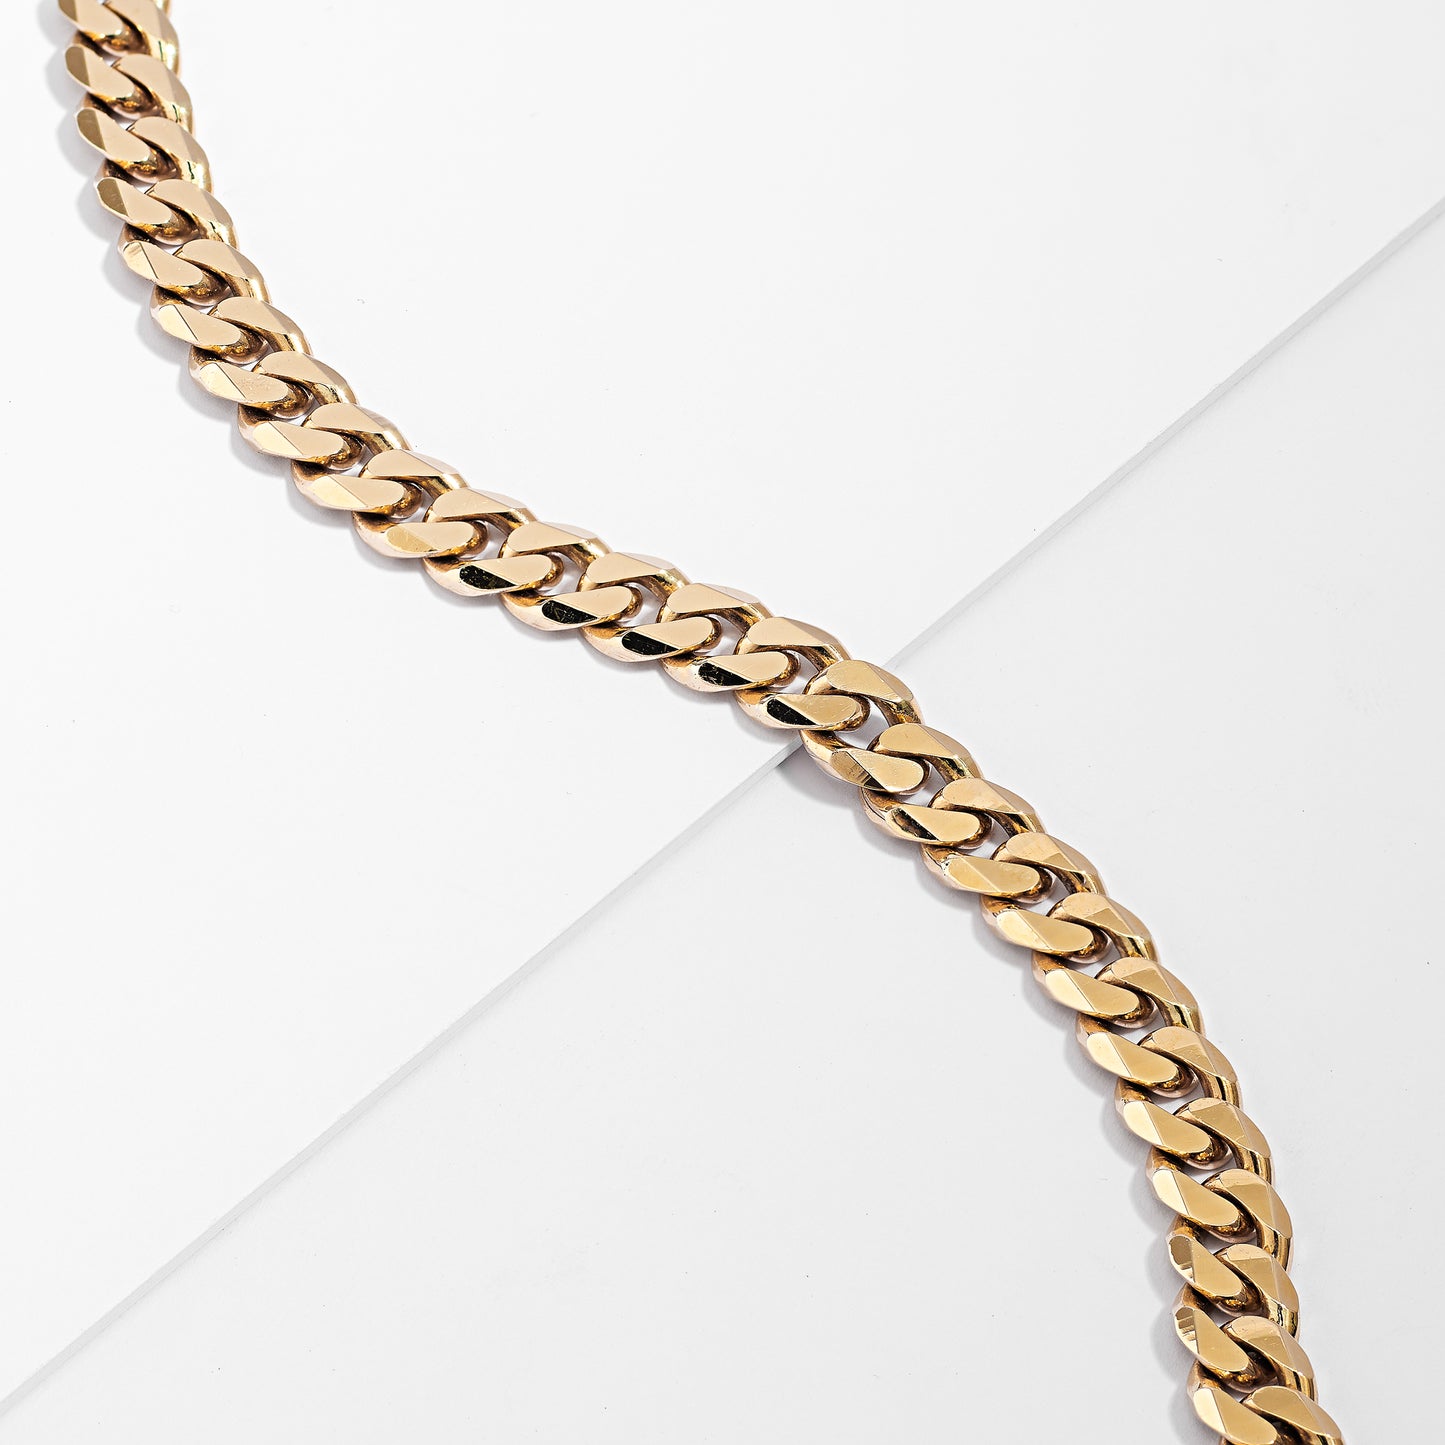 9K Yellow Gold 7mm Solid Curb Link Chain 55cm